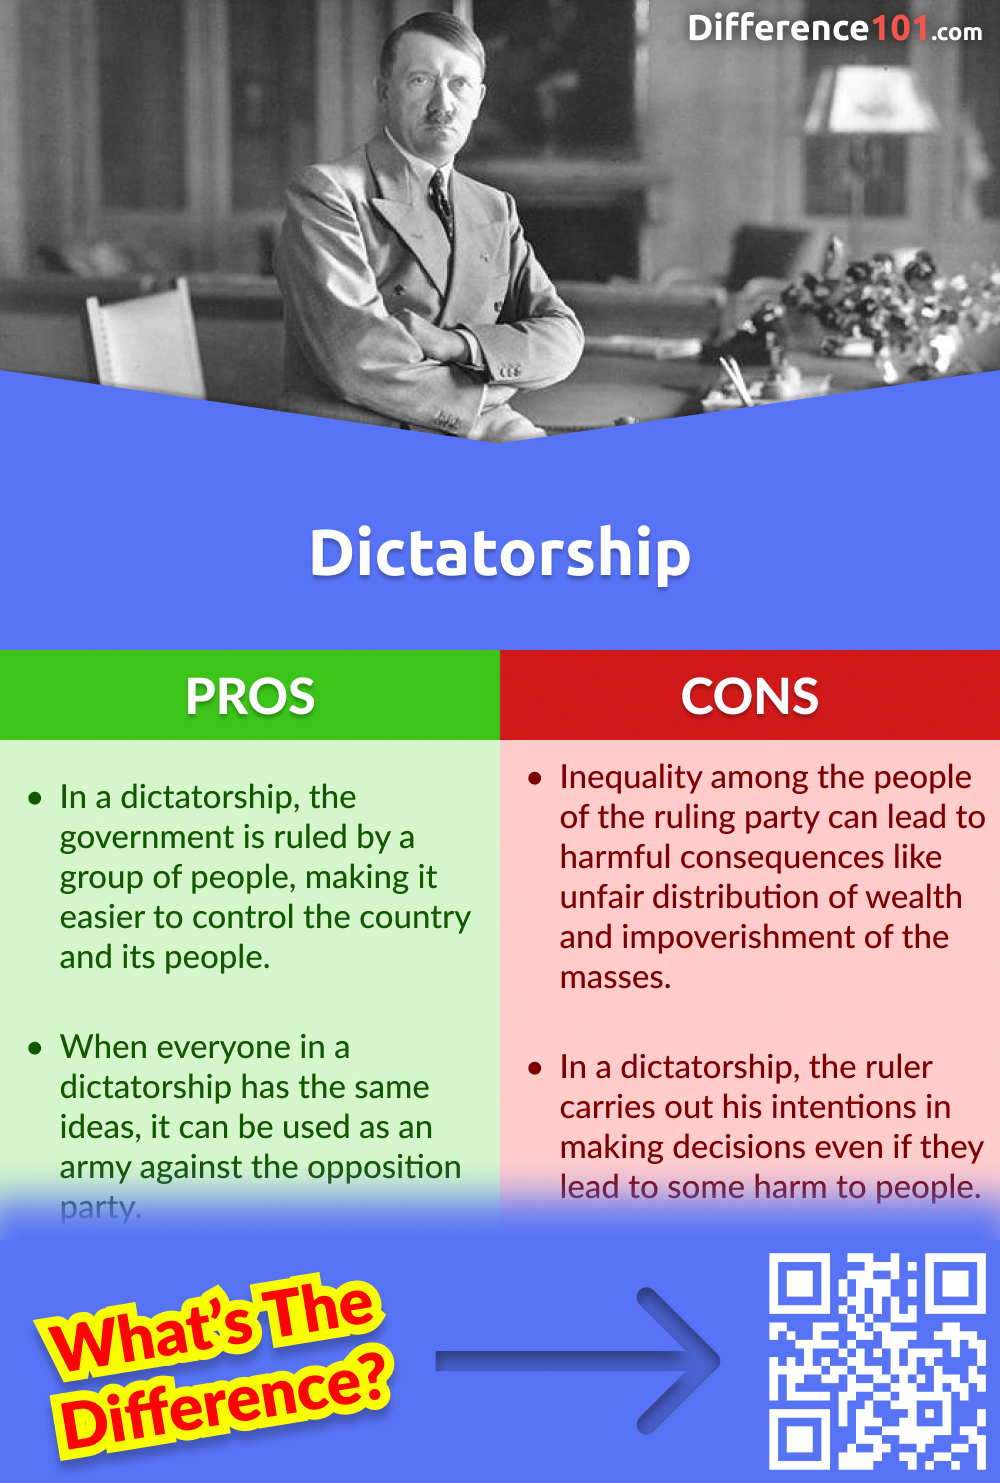 Dictatorship Pros and Cons